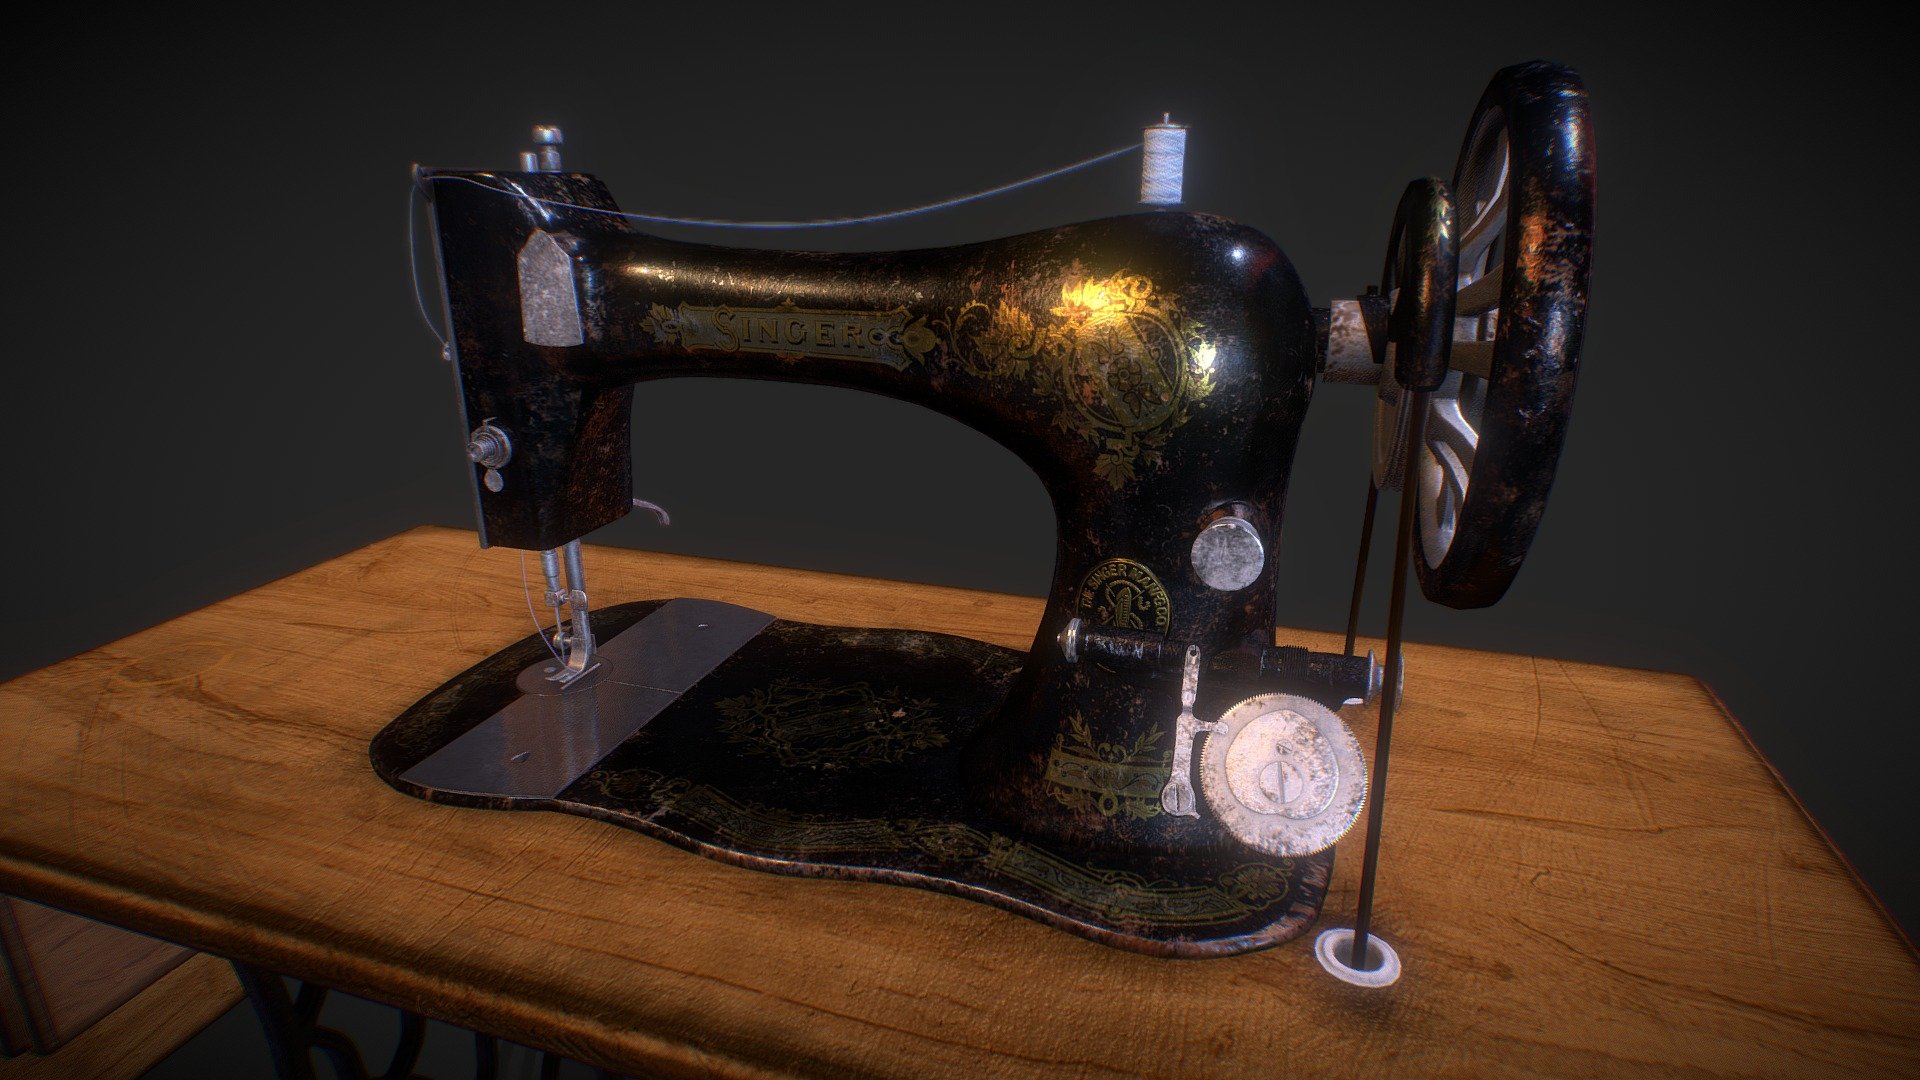 1892 Singer Sewing Machine model for the Ubisoft Toronto Next 2022 Challenge. 
I hope You can use it as a good reference for your projects. It was challenging to find a good 3d model with all details as a reference on the internet 3d model